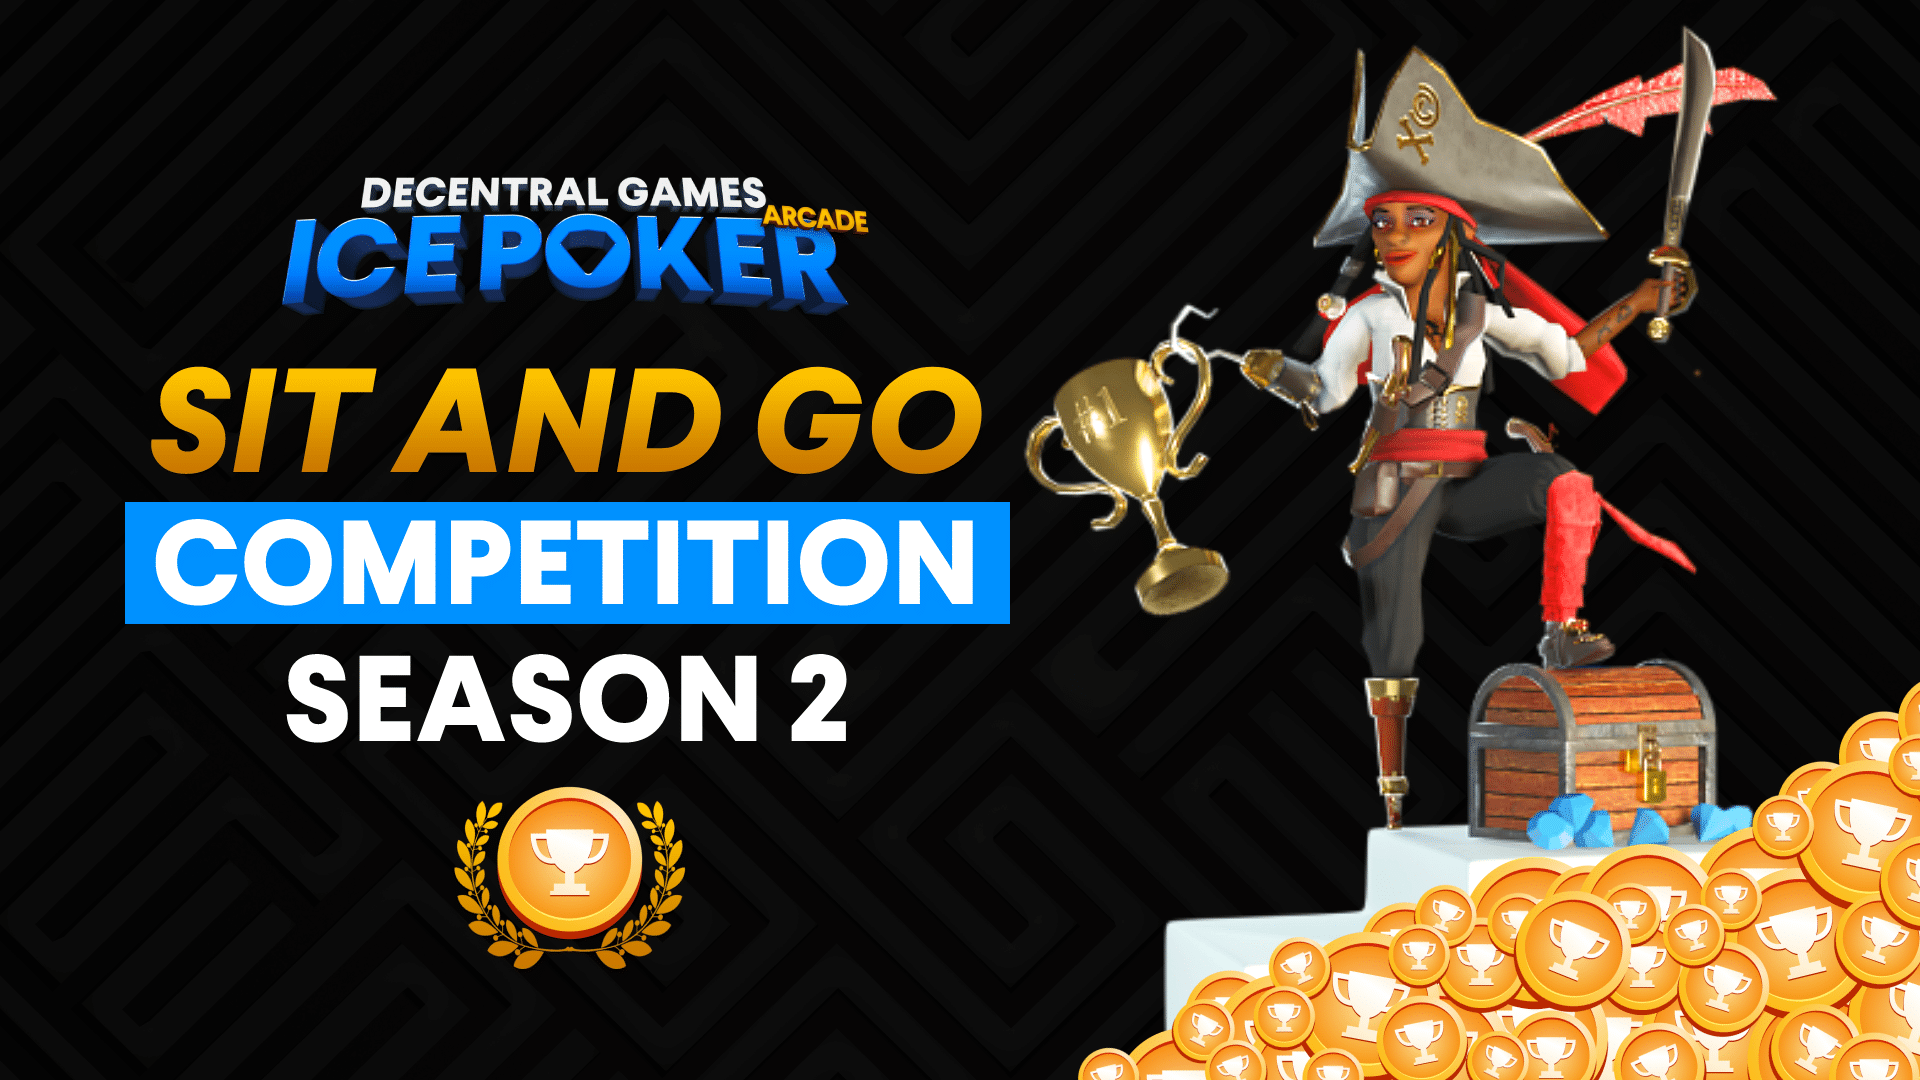 ICE Poker SNG Competition Season 2 with ICE Pirate standing on a podium